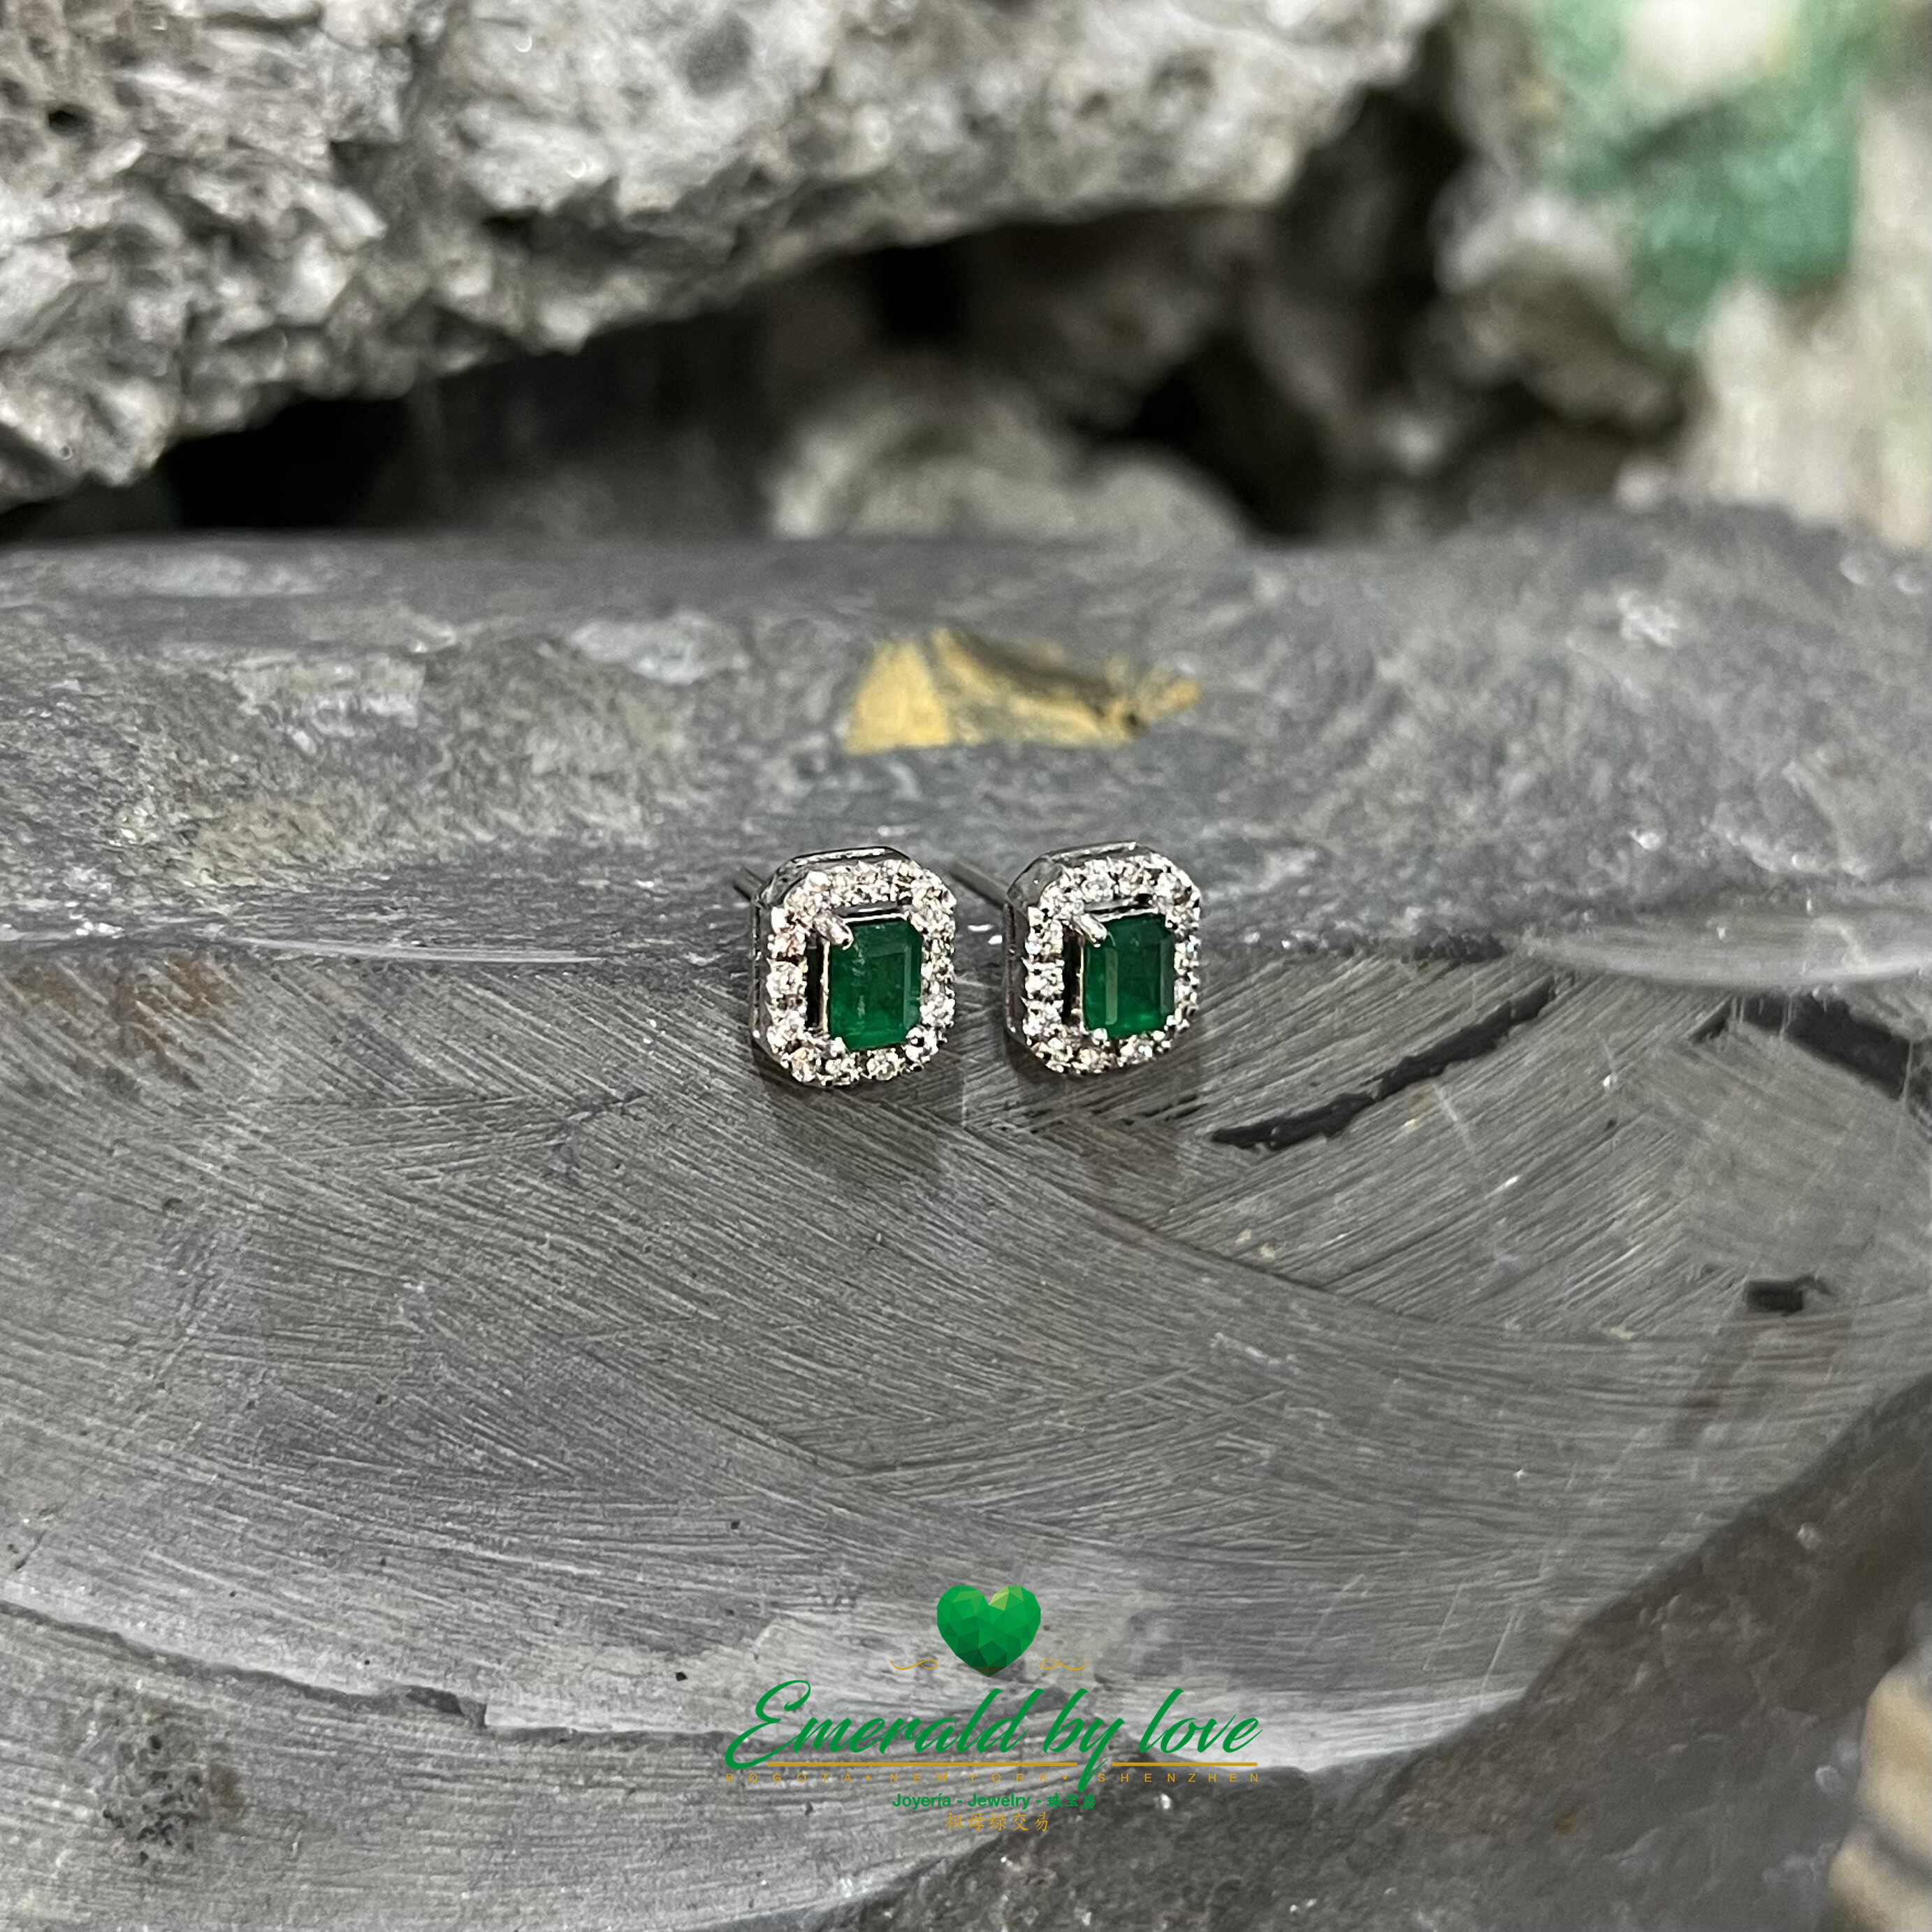 Regal Marquise White Gold Earrings with 1.10 tcw Emerald Cut Emeralds and 0.28 tcw Diamonds